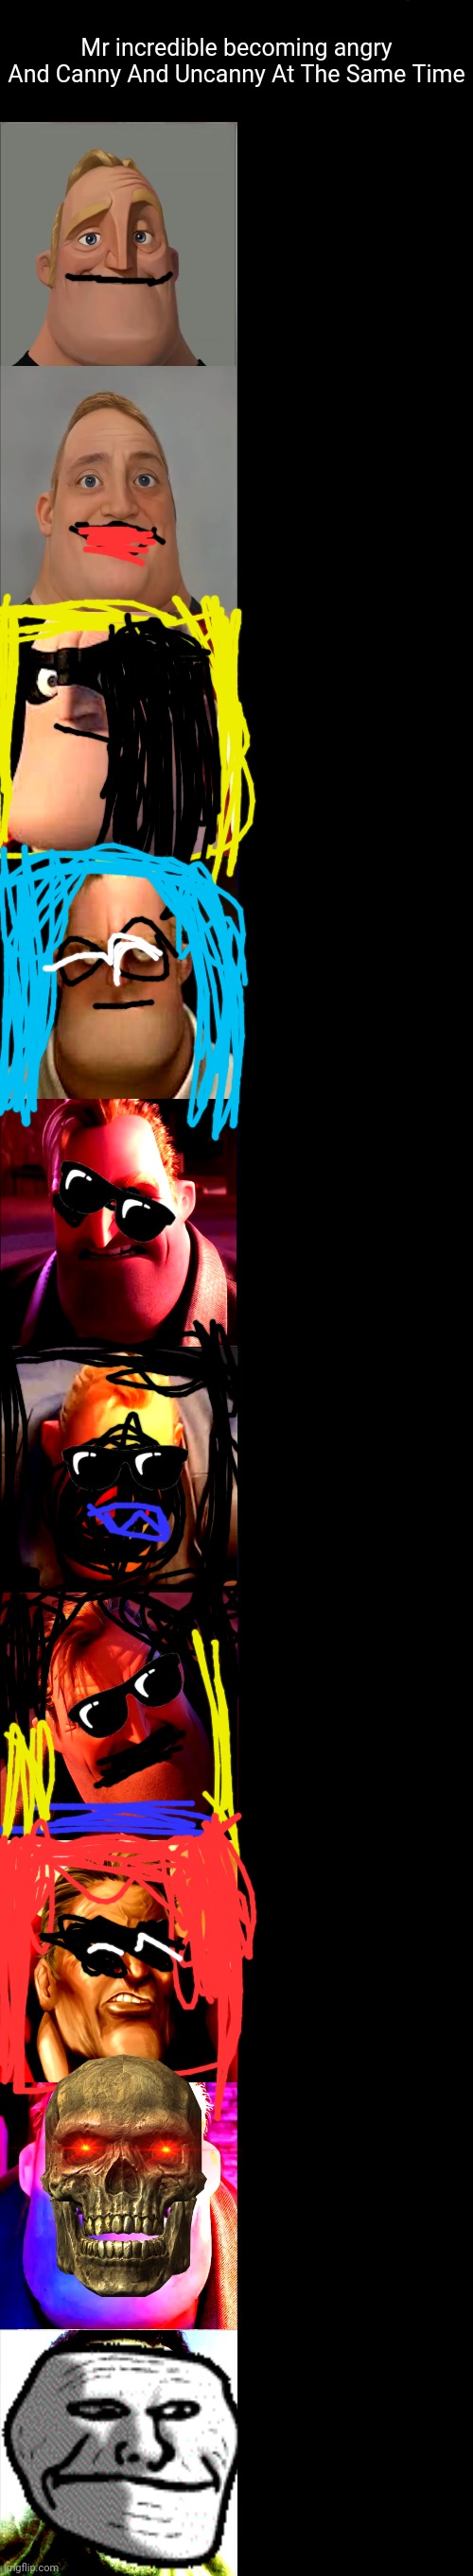 (Bad) Mr incredible becoming uncanny And Canny and angry At the Same Time | Mr incredible becoming angry And Canny And Uncanny At The Same Time | image tagged in mr incredible becoming angry | made w/ Imgflip meme maker